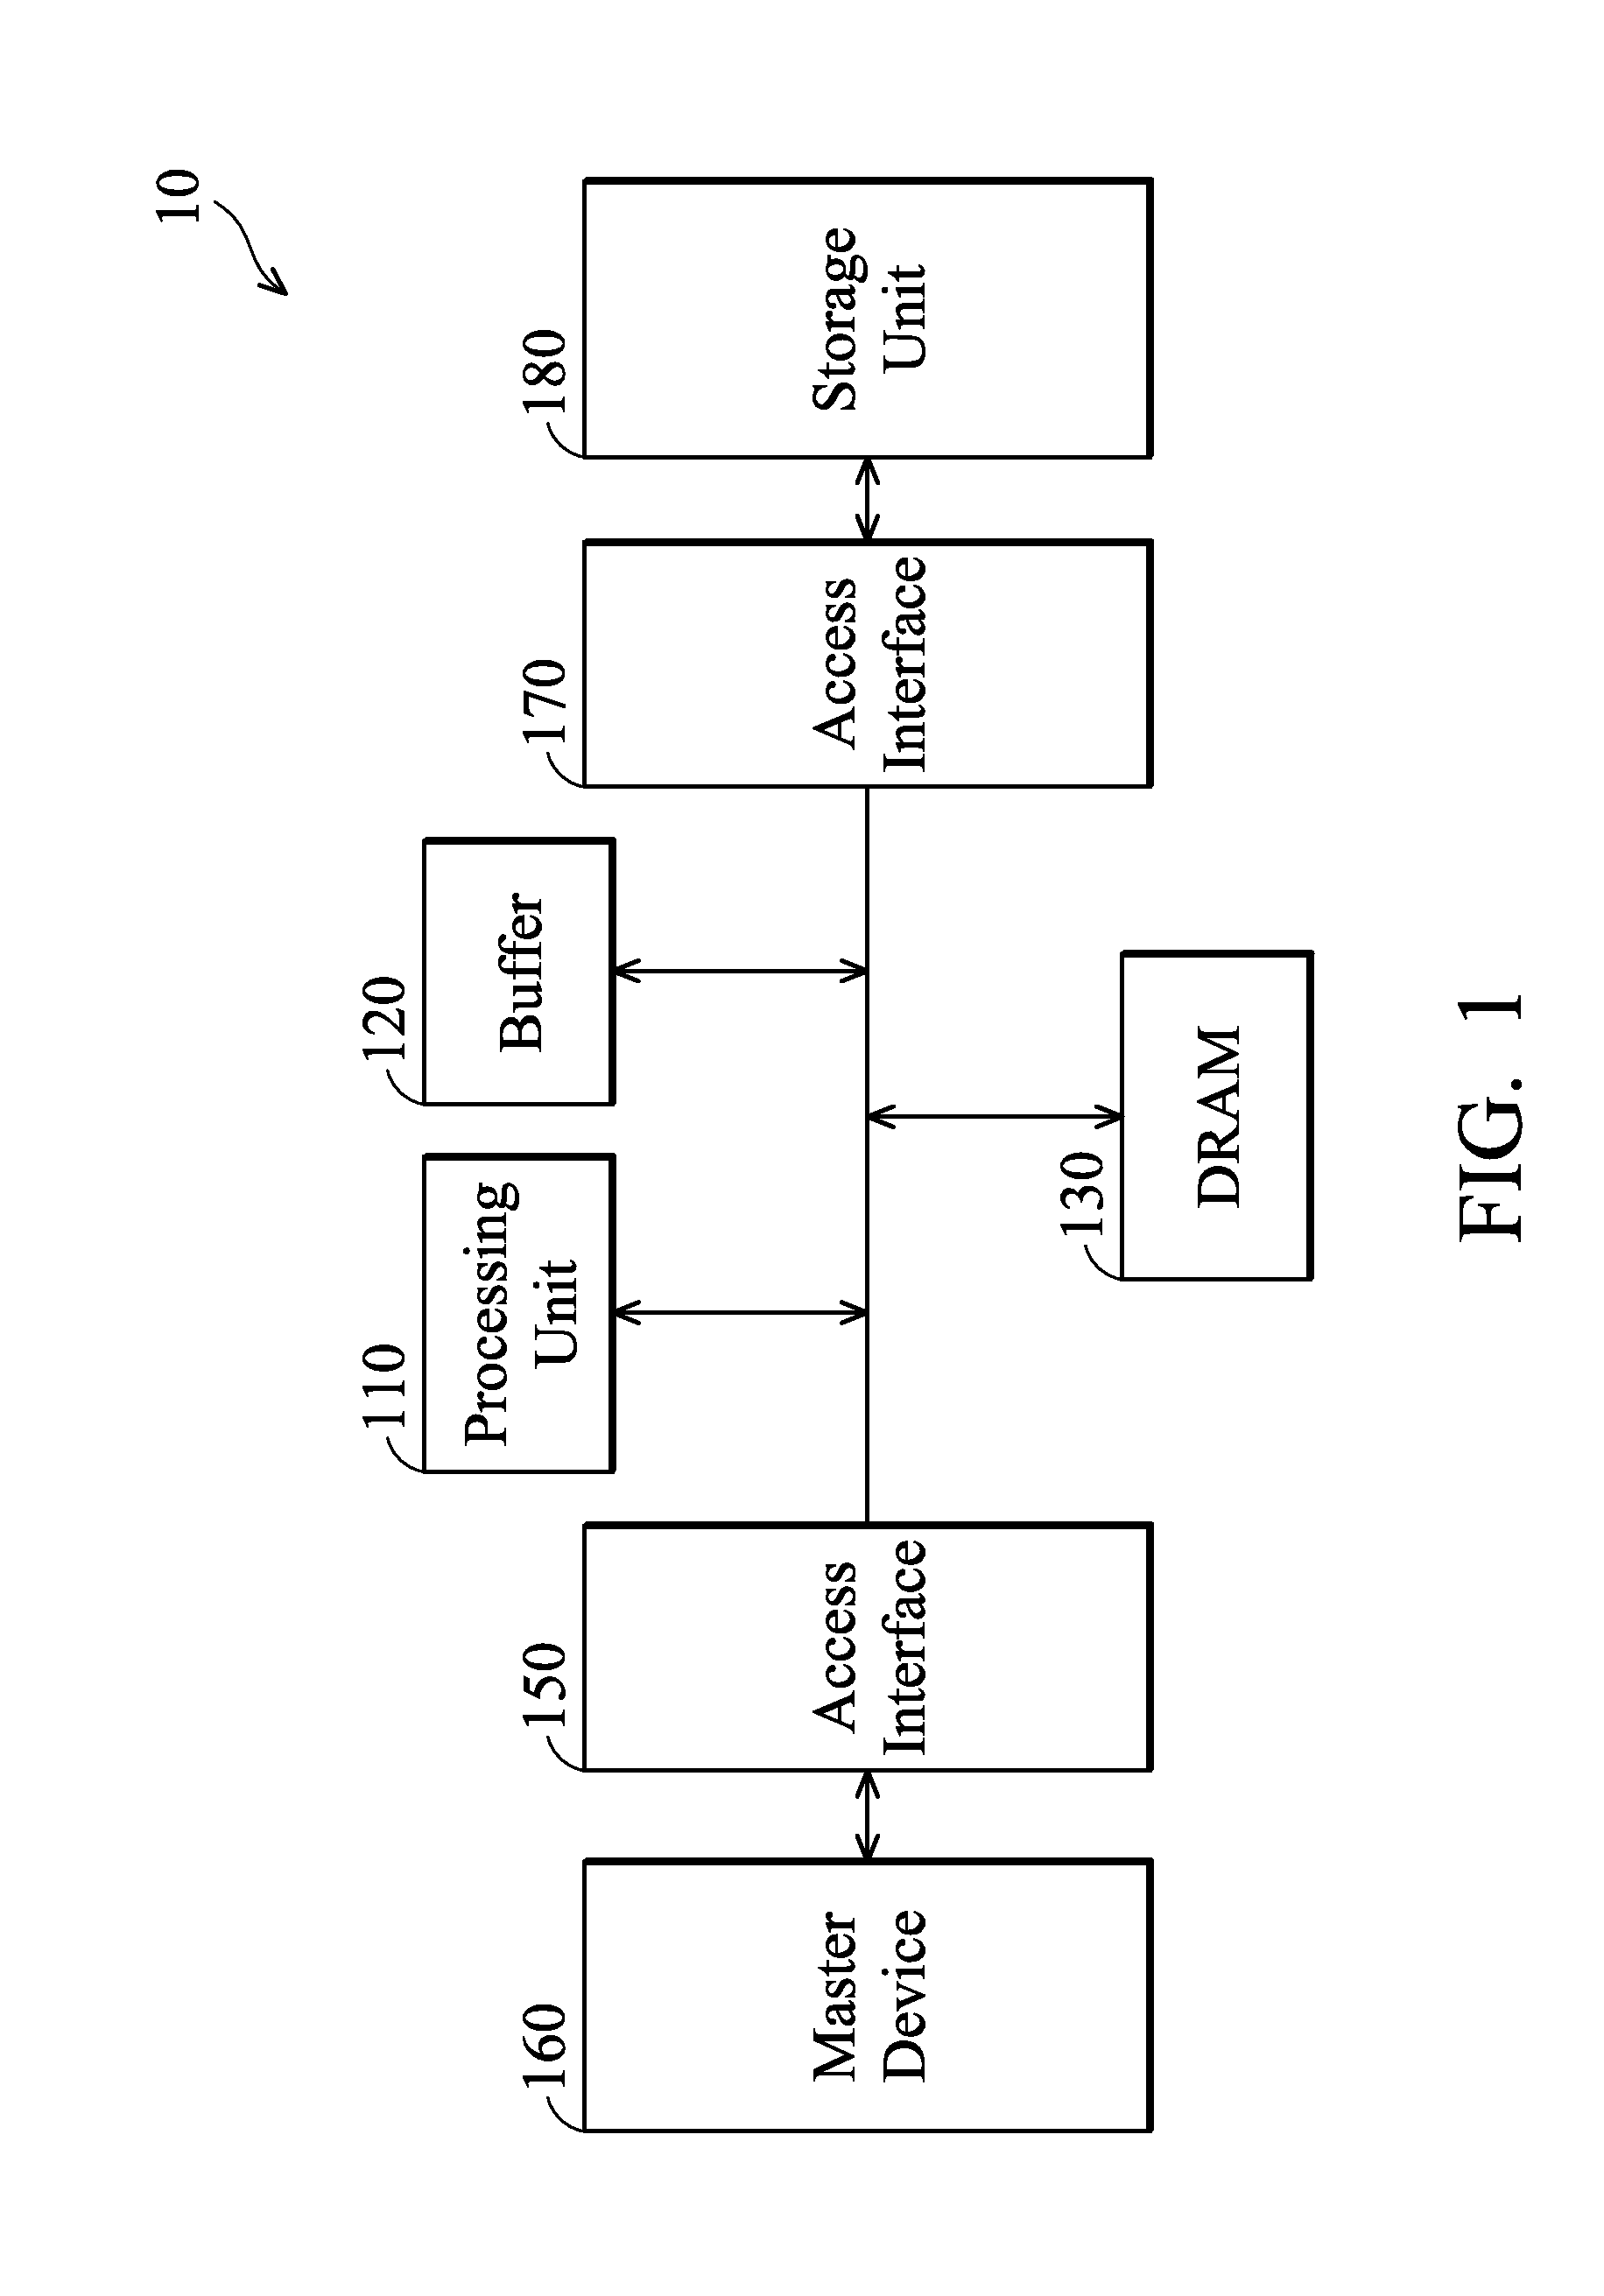 Methods for Caching and Reading Data to be Programmed into a Storage Unit and Apparatuses Using the Same